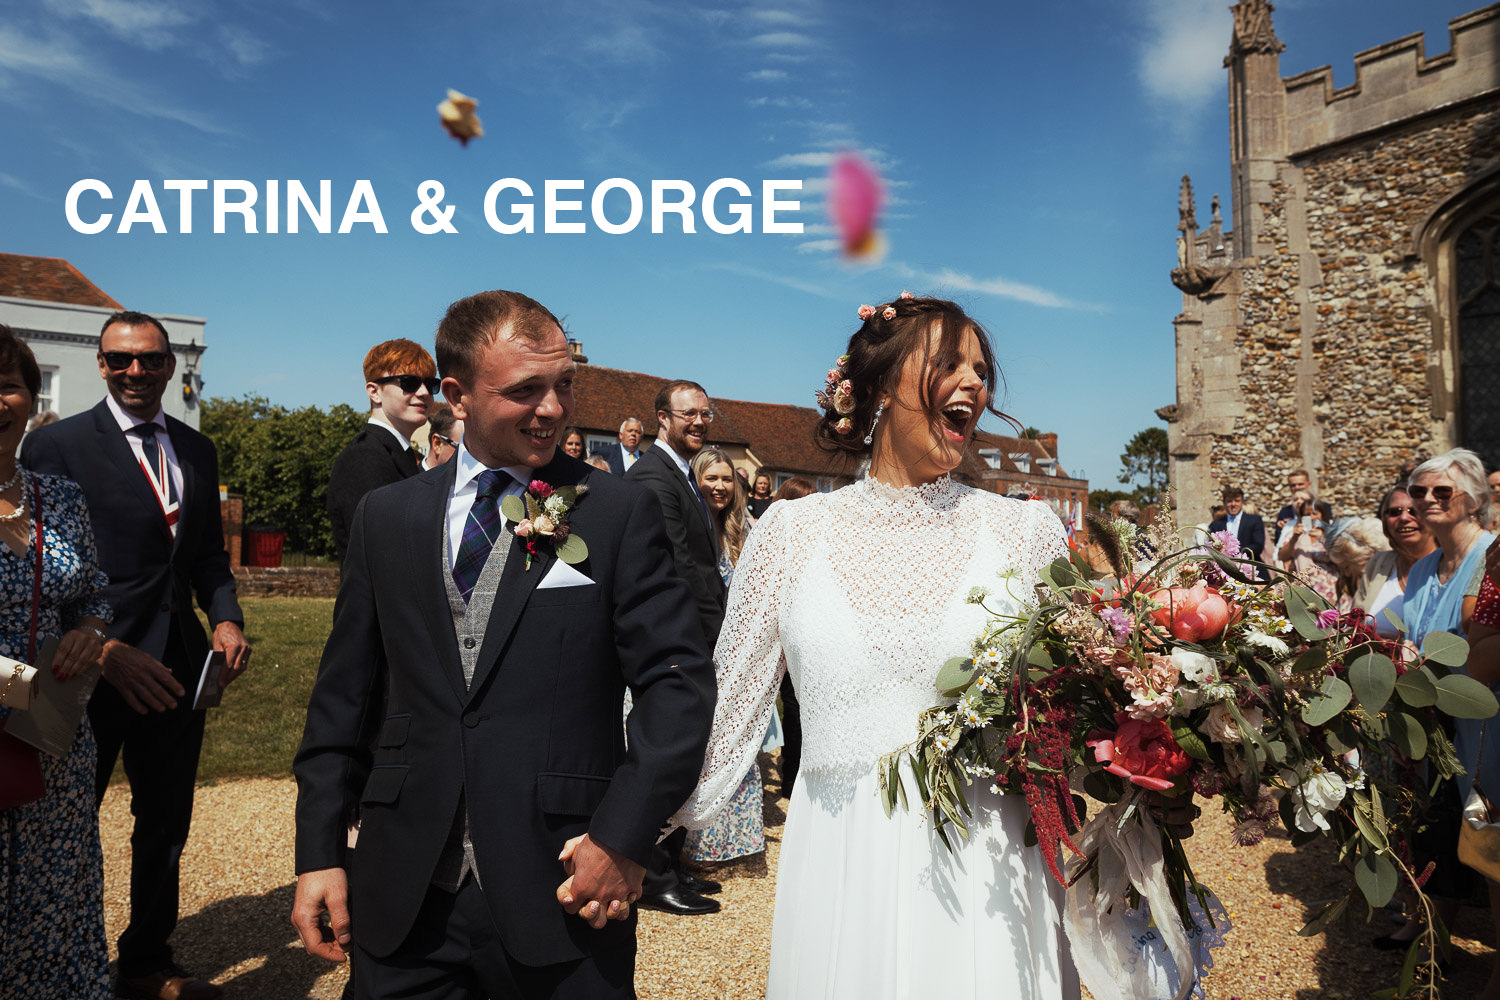 A bride and groom leaving the Thaxted Parish church after their wedding. Guests throw confetti, the sky is blue on a sunny day.